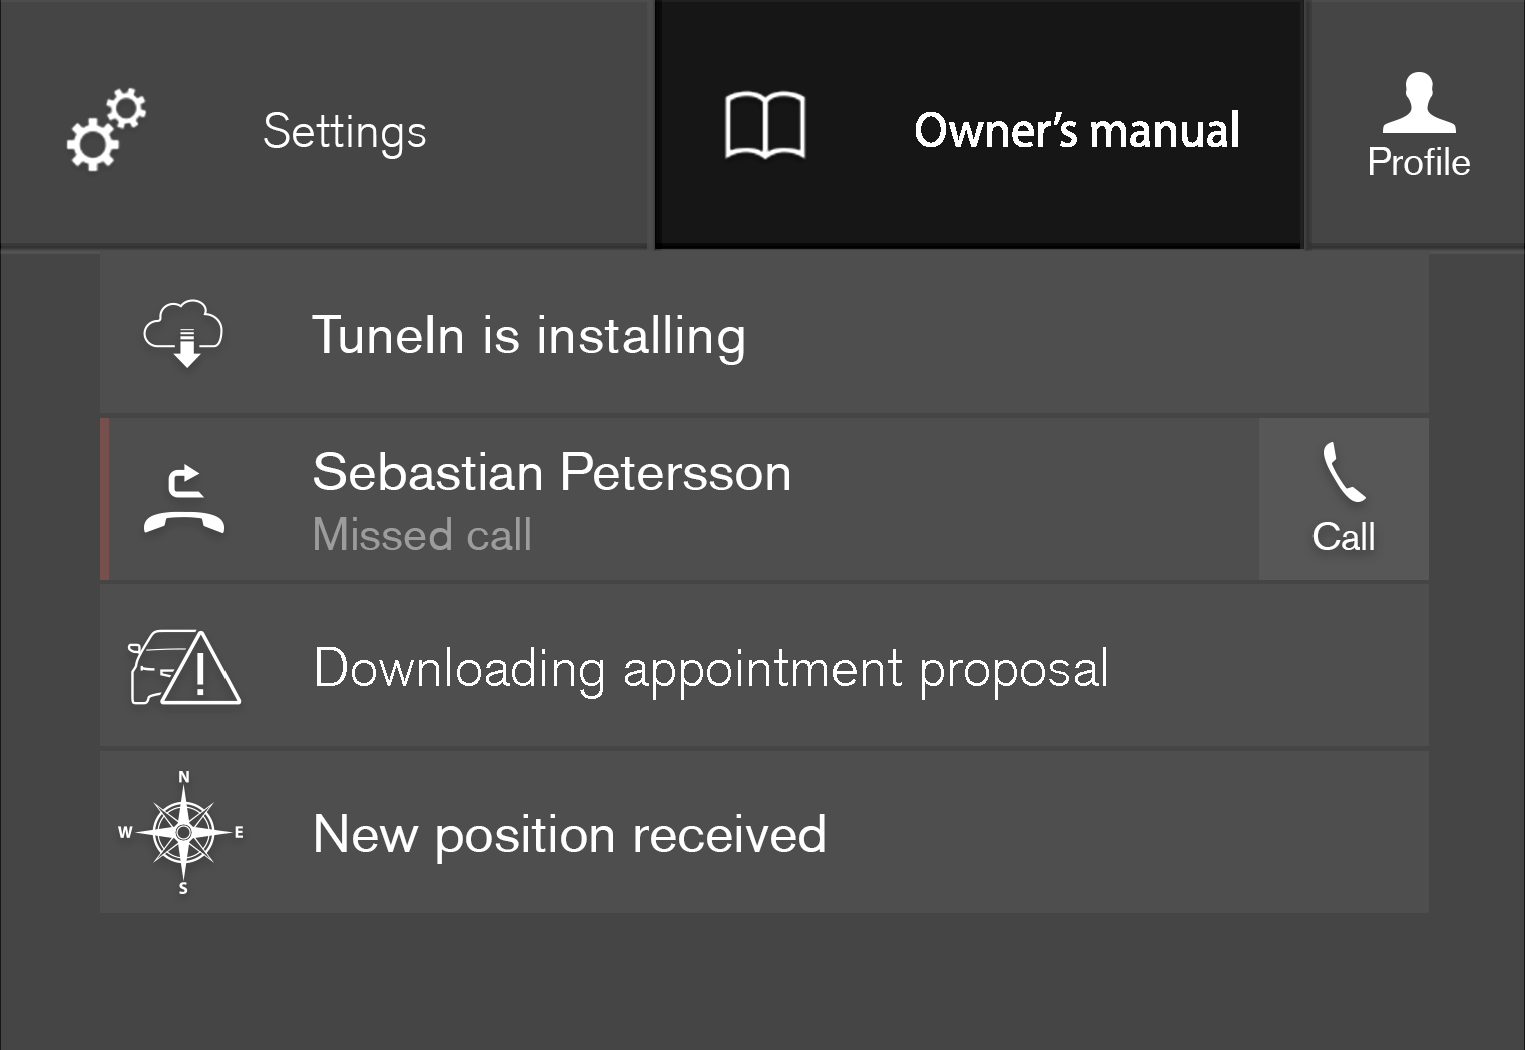 P5-1717-Owner's manual in settings pane-Highlighted